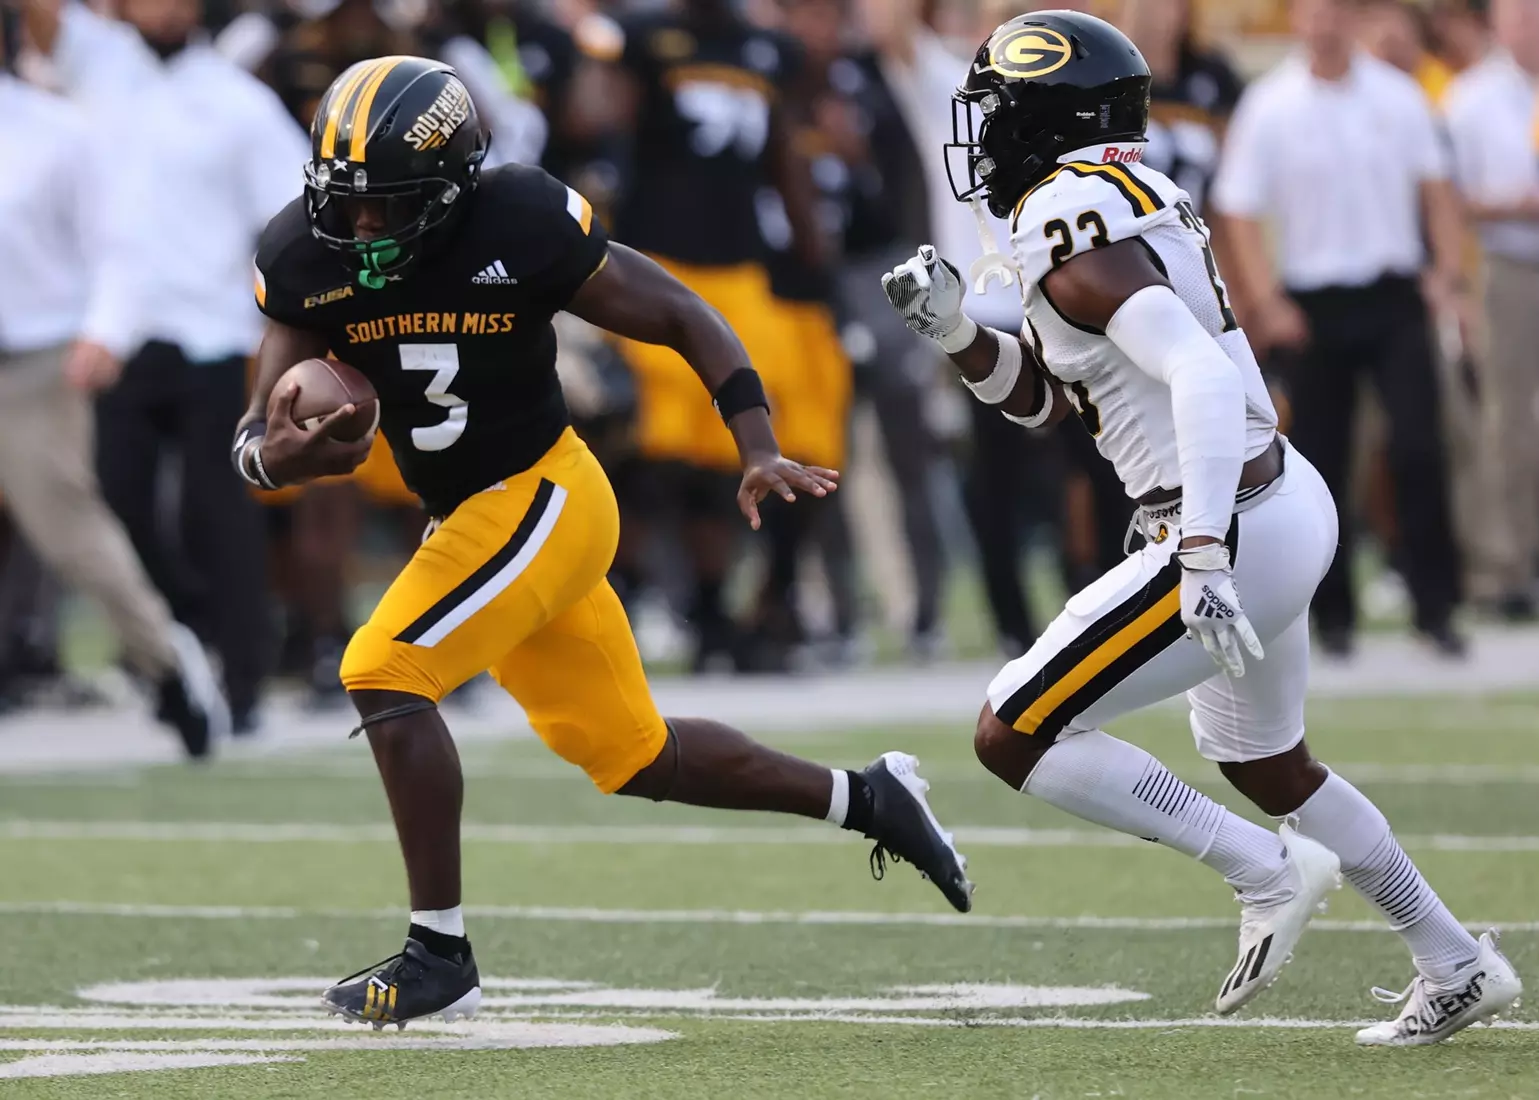 Frank Gore Jr. is the star RB and Swiss-Army knife of an offensive weapon at Southern Miss. Hula Bowl scout Victor Horn breaks down Gore Jr. as an NFL Prospect in his report.